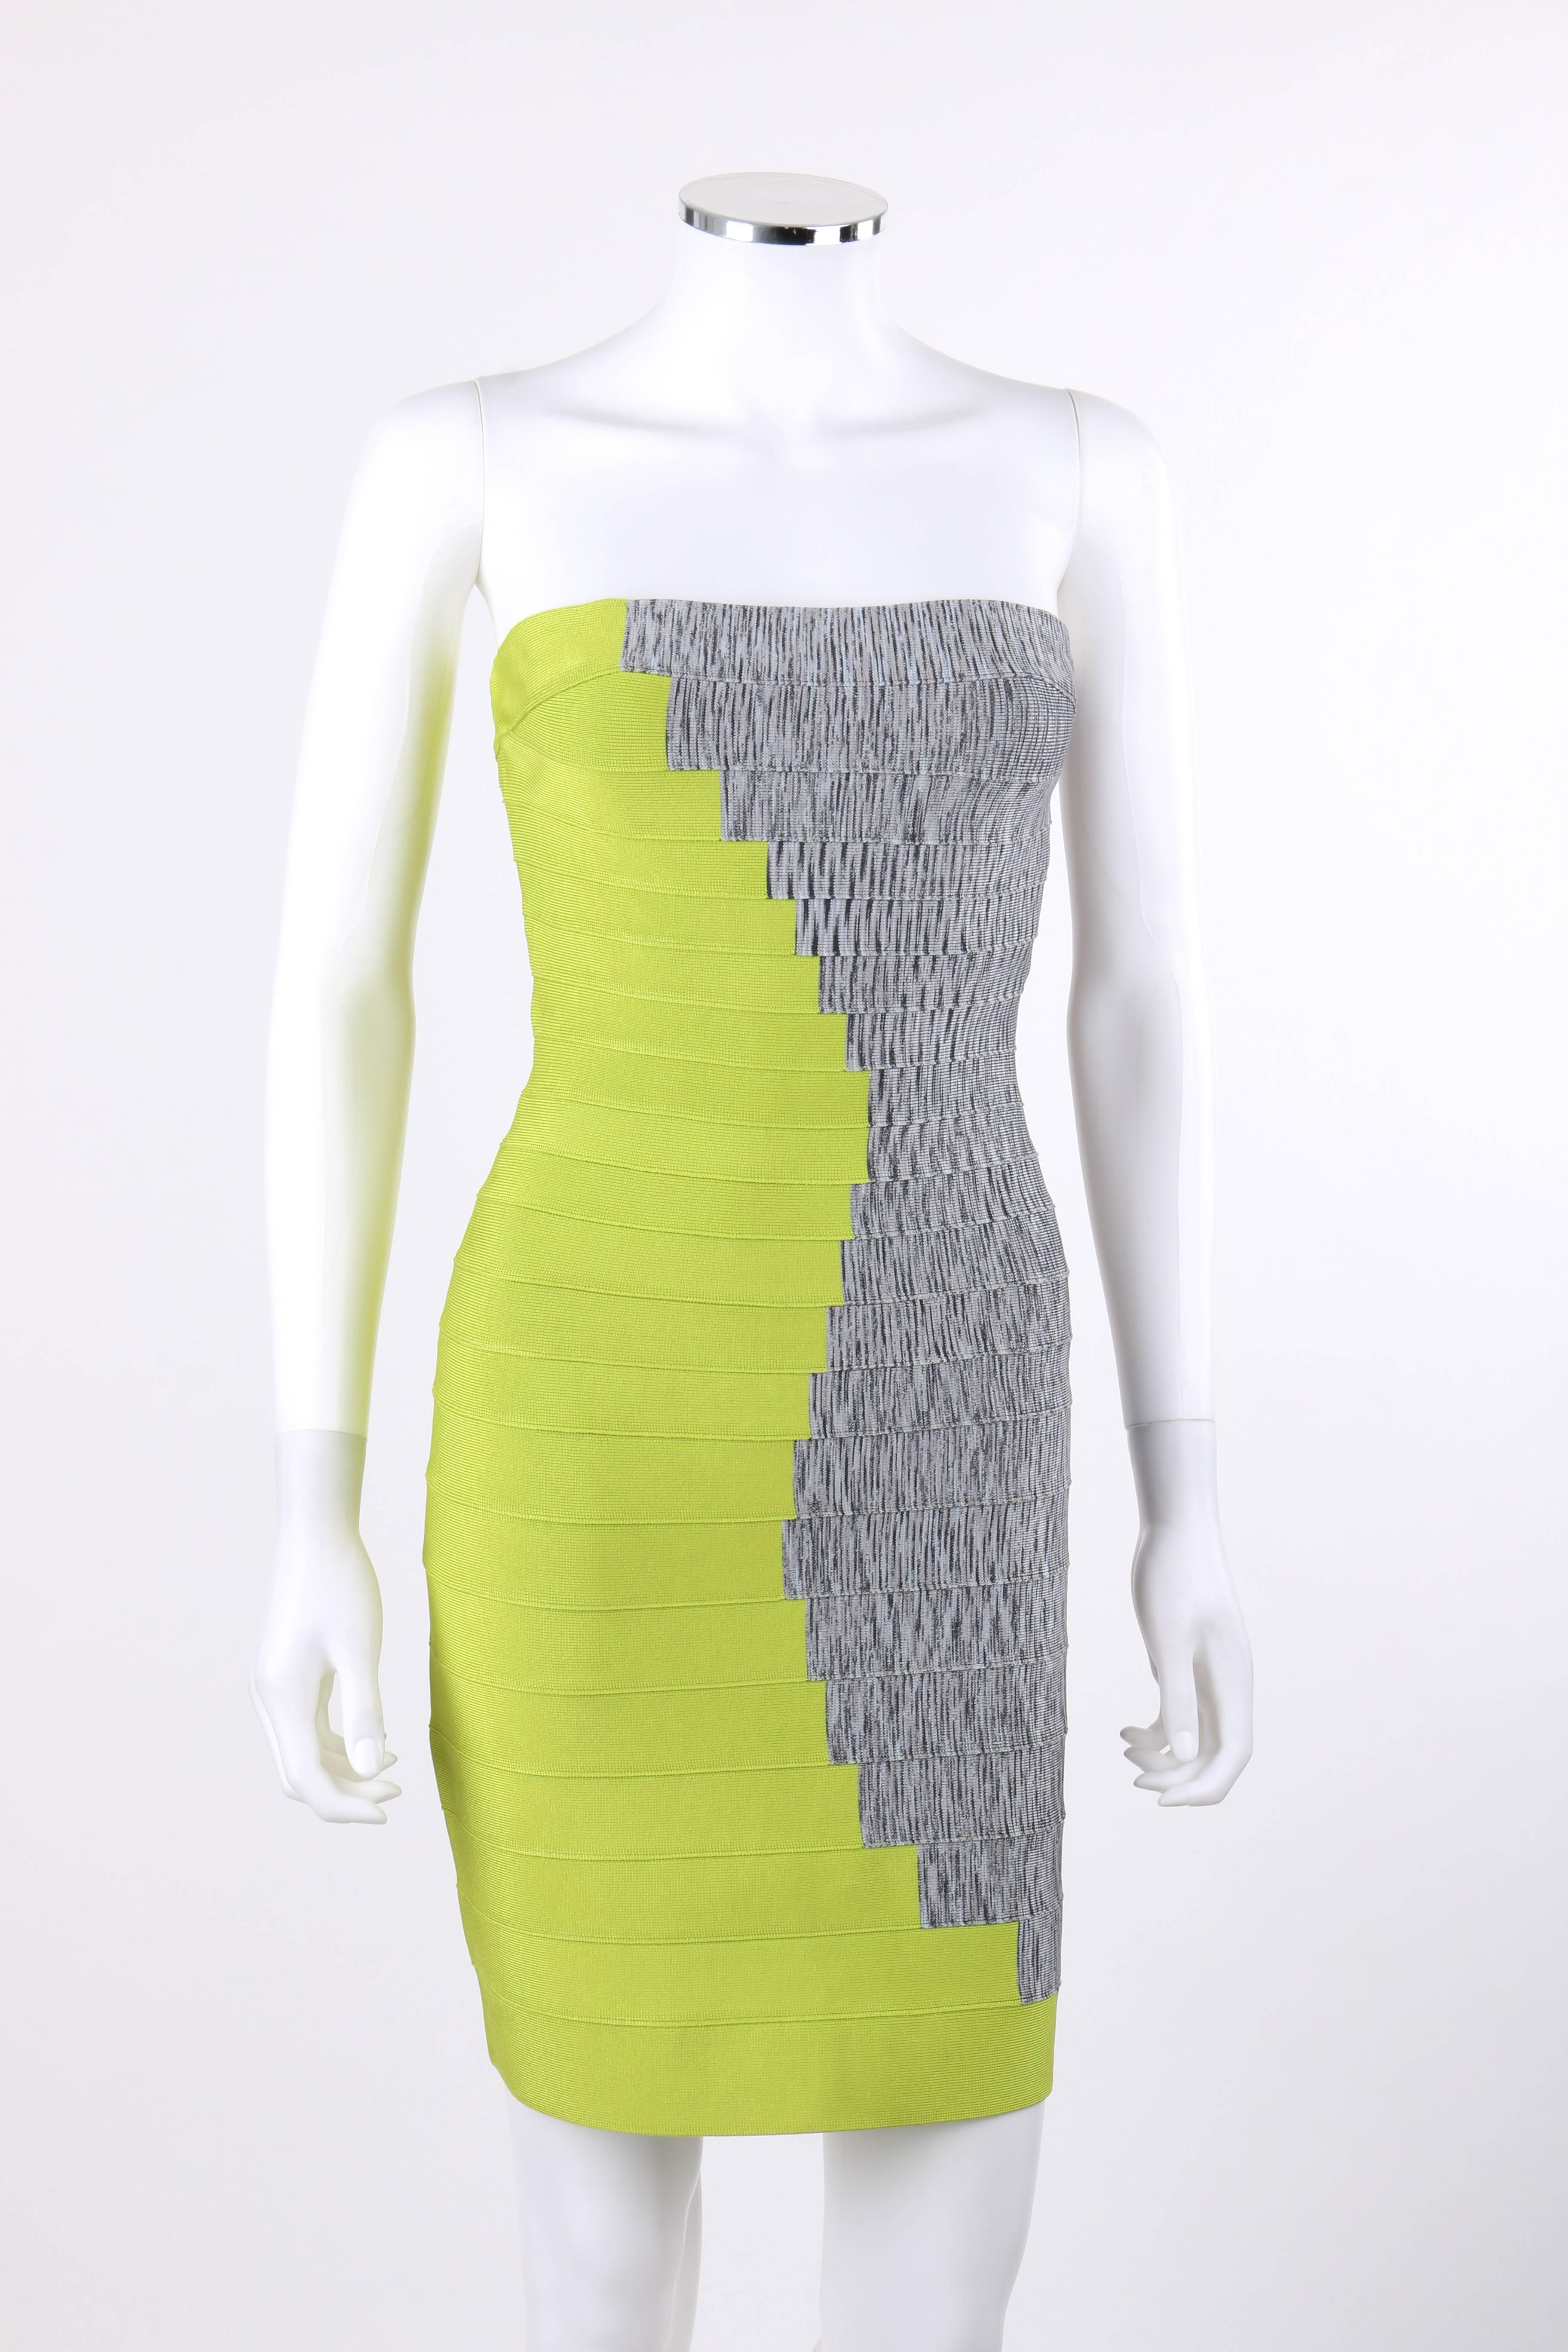 Herve Leger Resort 2010 chartreuse green and gray two-tone bandage knit cocktail dress. Designed by Max Azria. Chartreuse green and heathered gray two-tone curved color-block design. Bodycon / sheath style. Strapless. Center back zipper with four